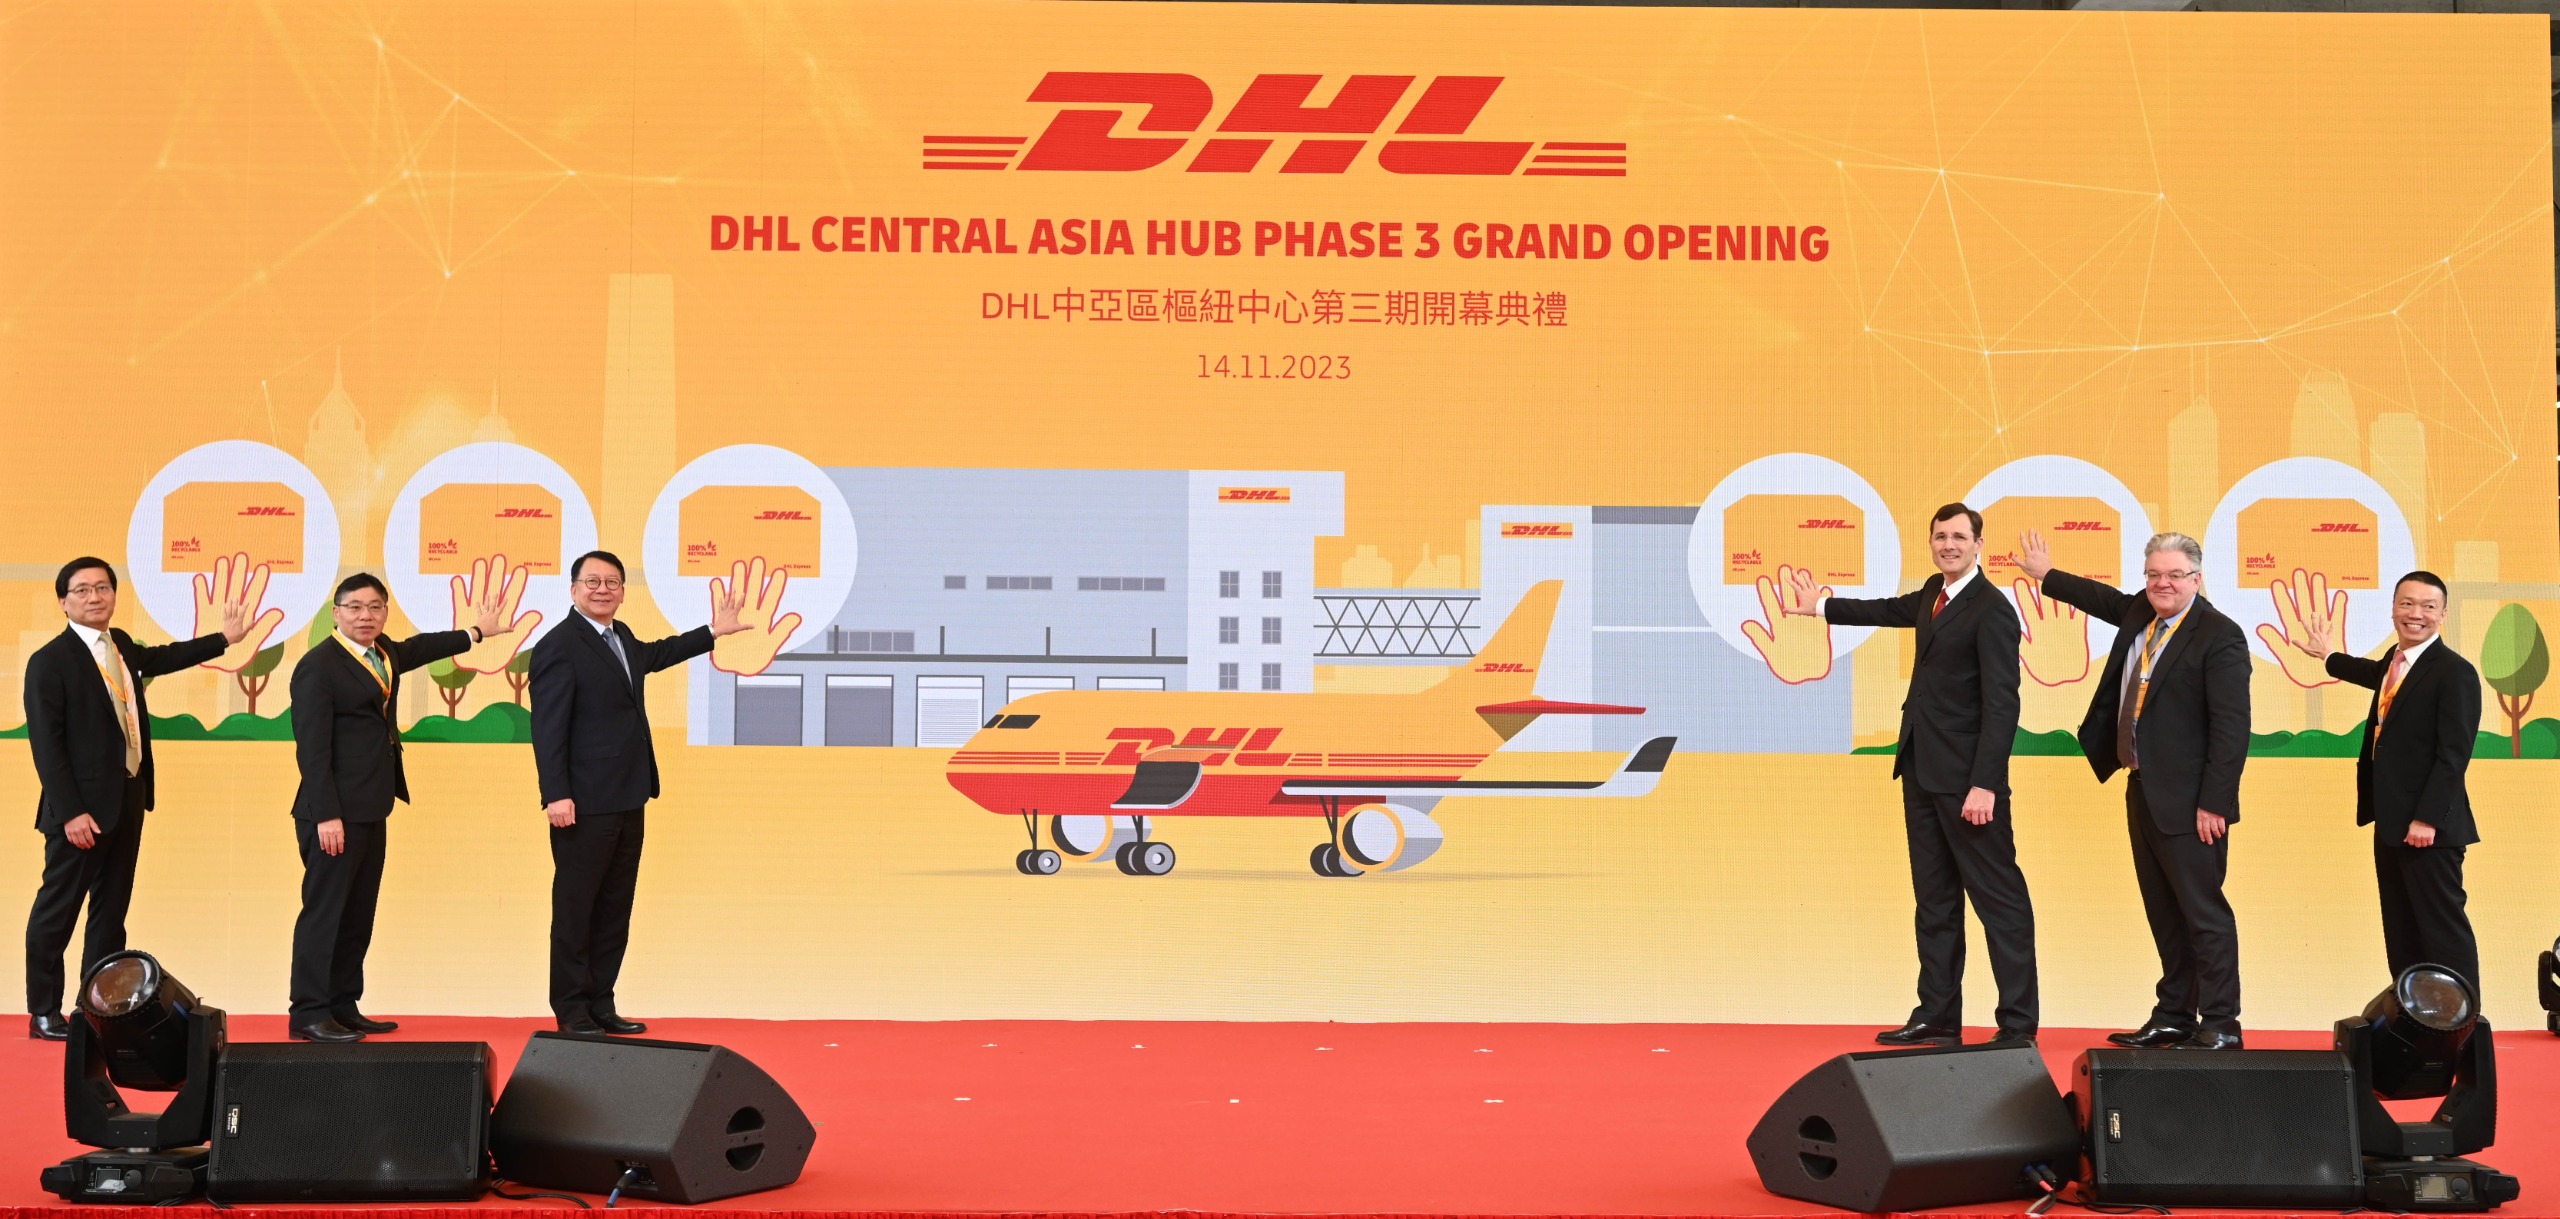 The Chief Secretary for Administration, Mr Chan Kwok-ki, attended the opening ceremony of the third phase expansion of the DHL Central Asia Hub